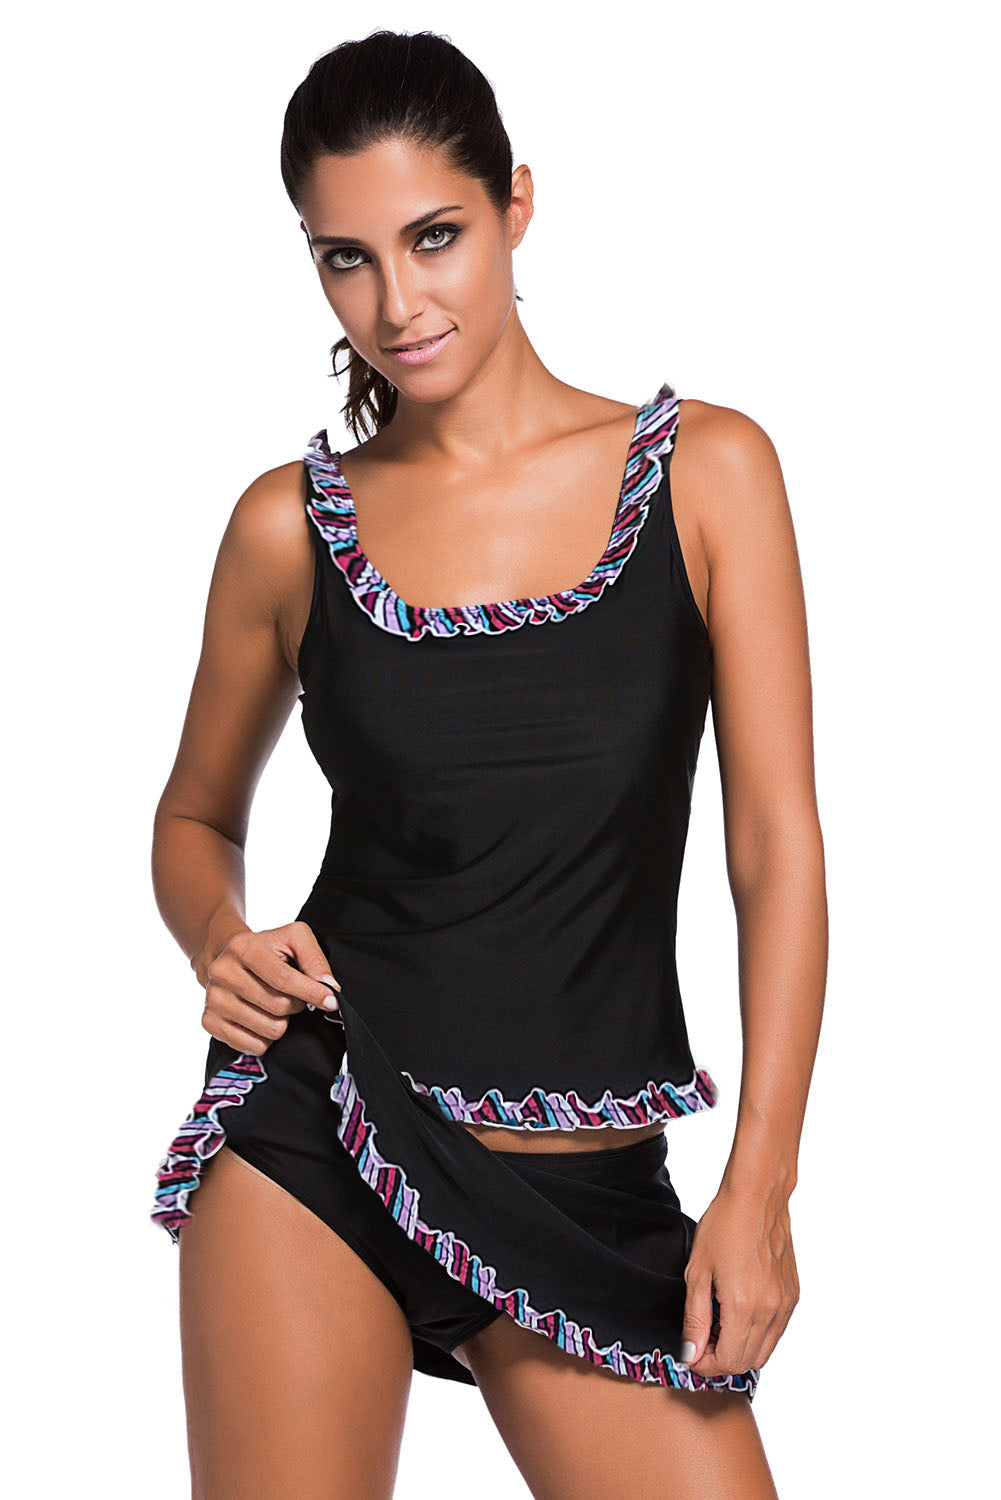 Ruffle Trim Black Active Tank Top and Skort Swimsuit as shown Polyester+Spandex Tankinis JT's Designer Fashion